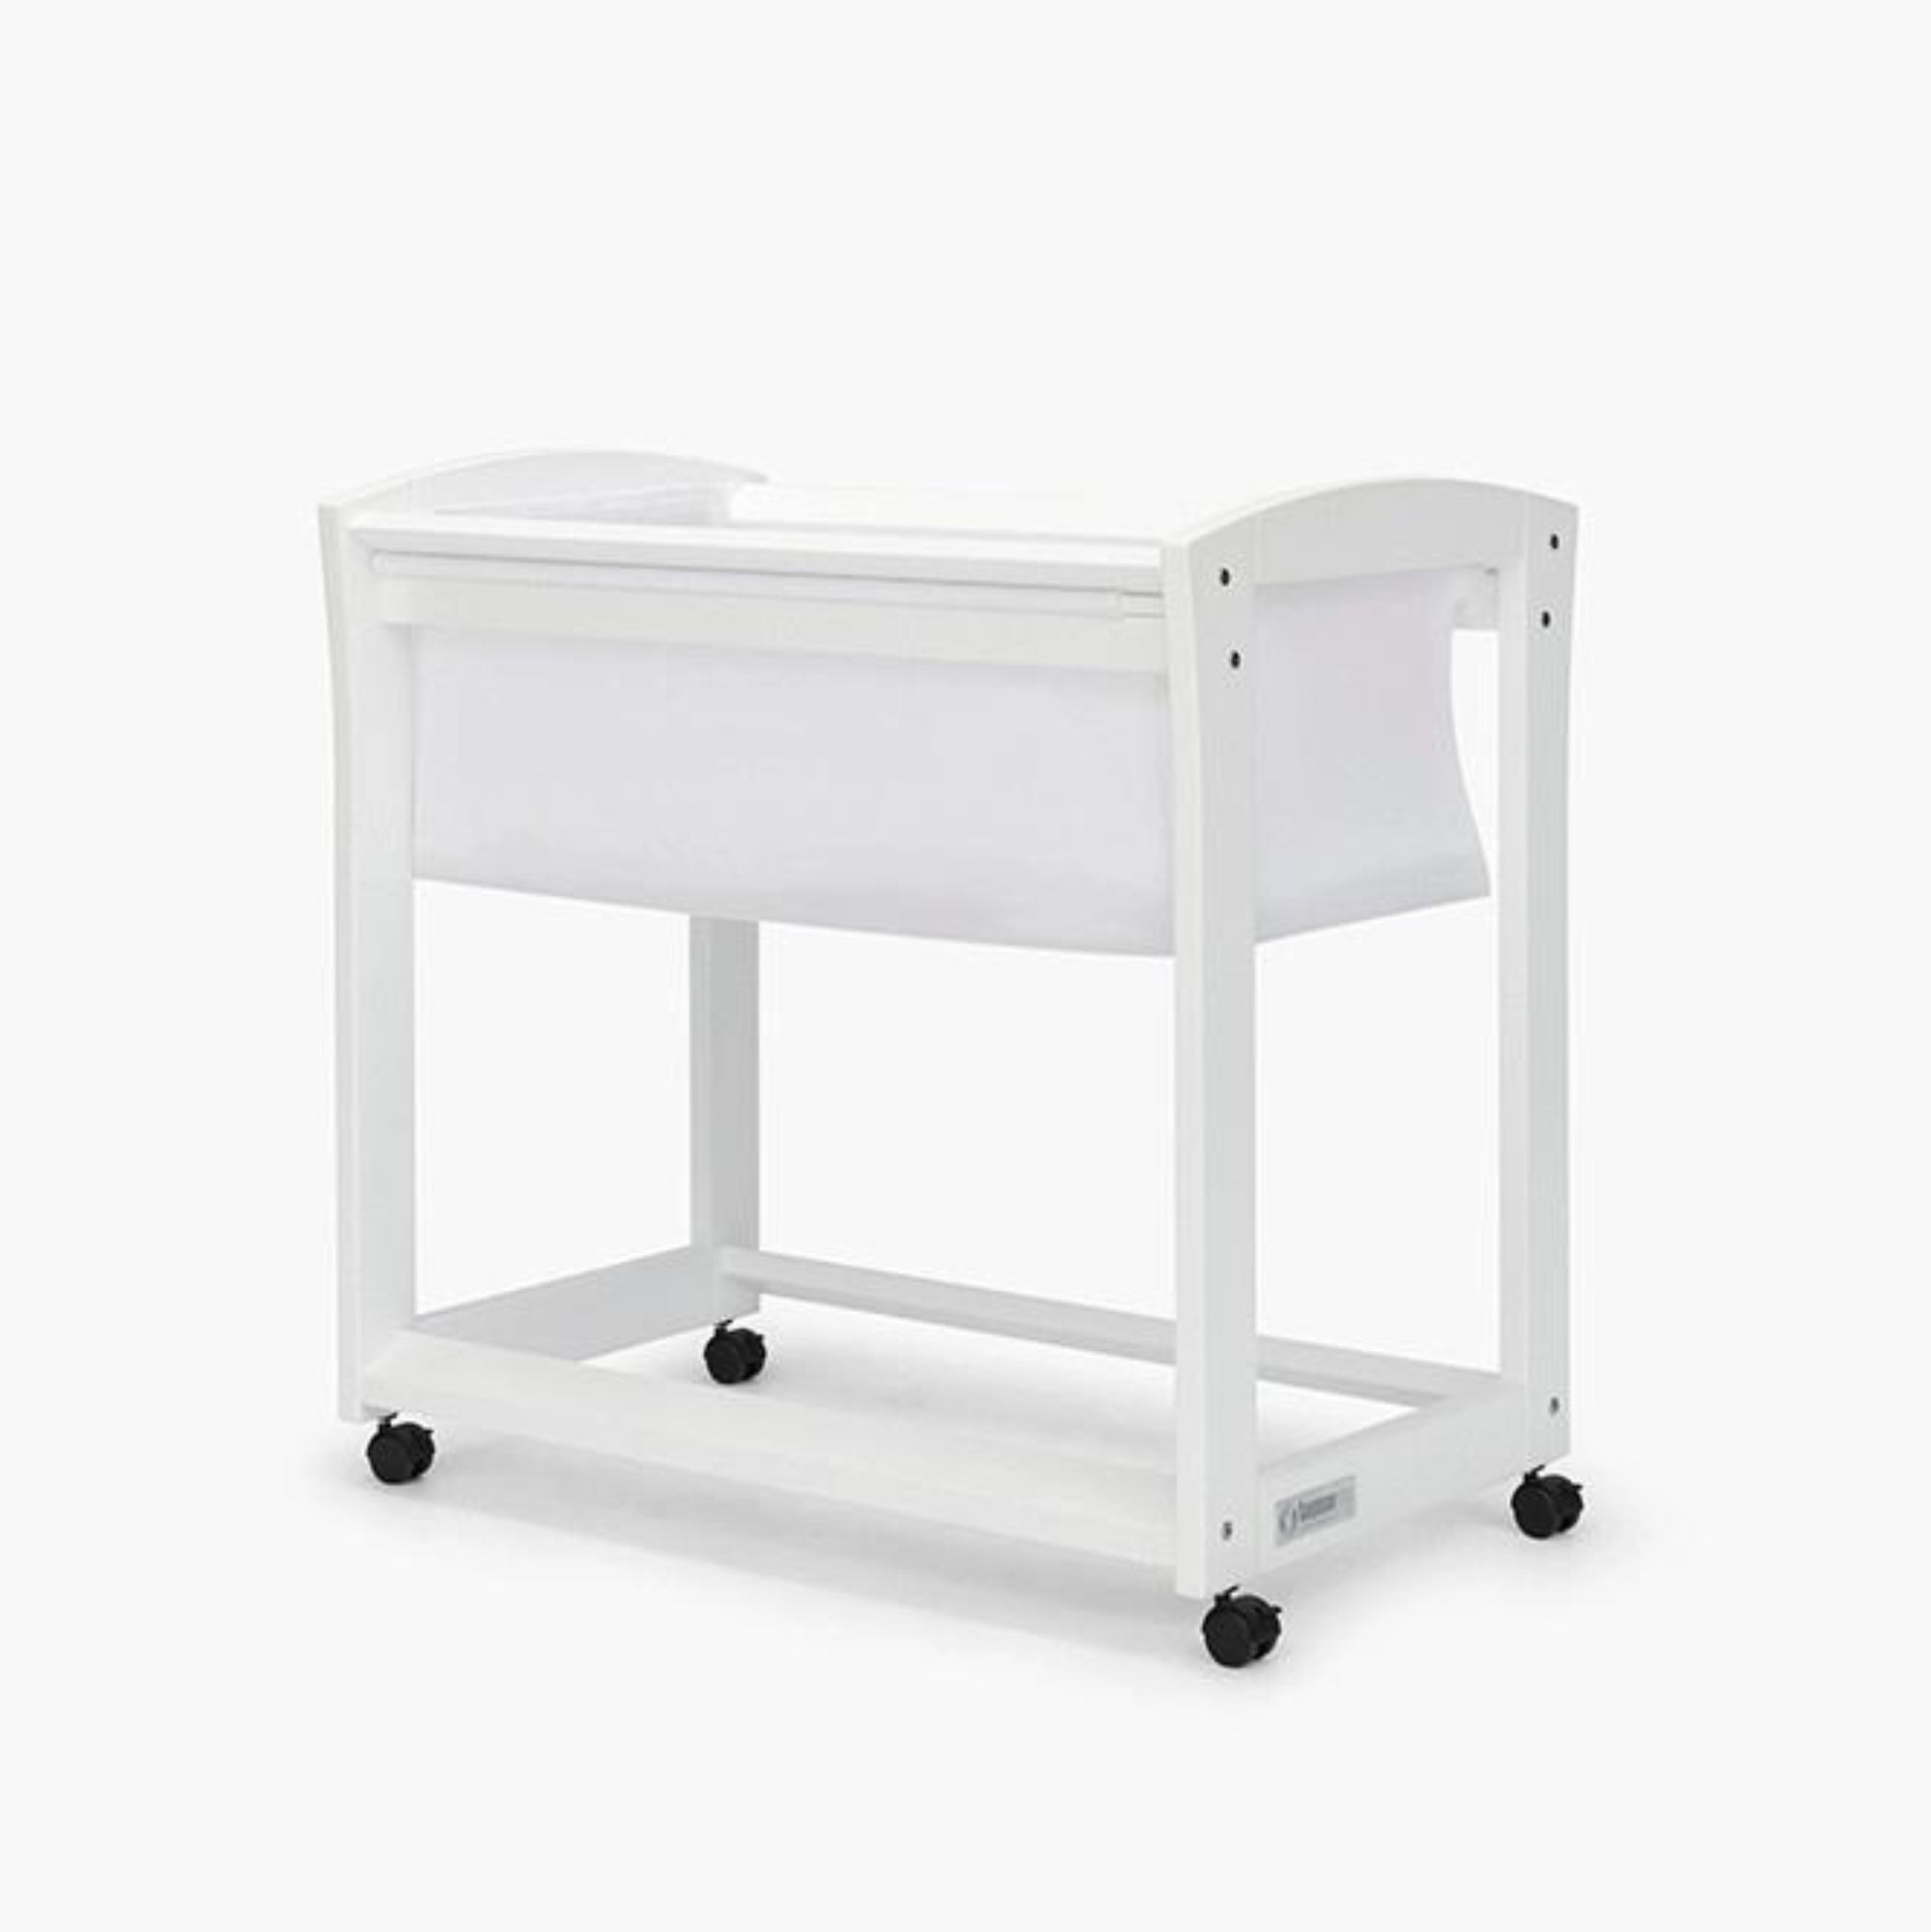 Tasman Eco Amore Bassinet With Mattress- White - Tiny Tots Baby Store 